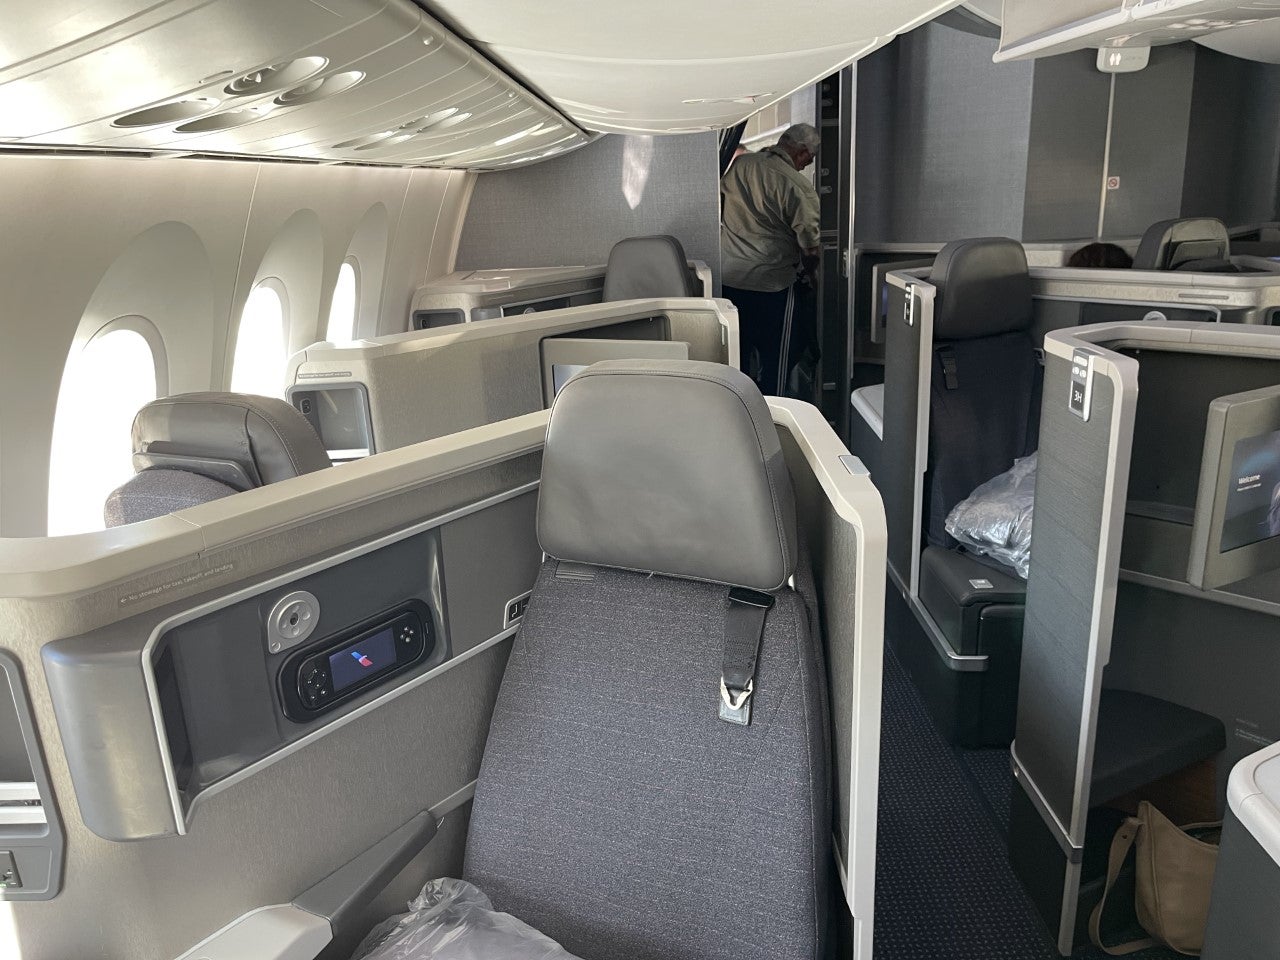 American Airlines Flagship business window seats